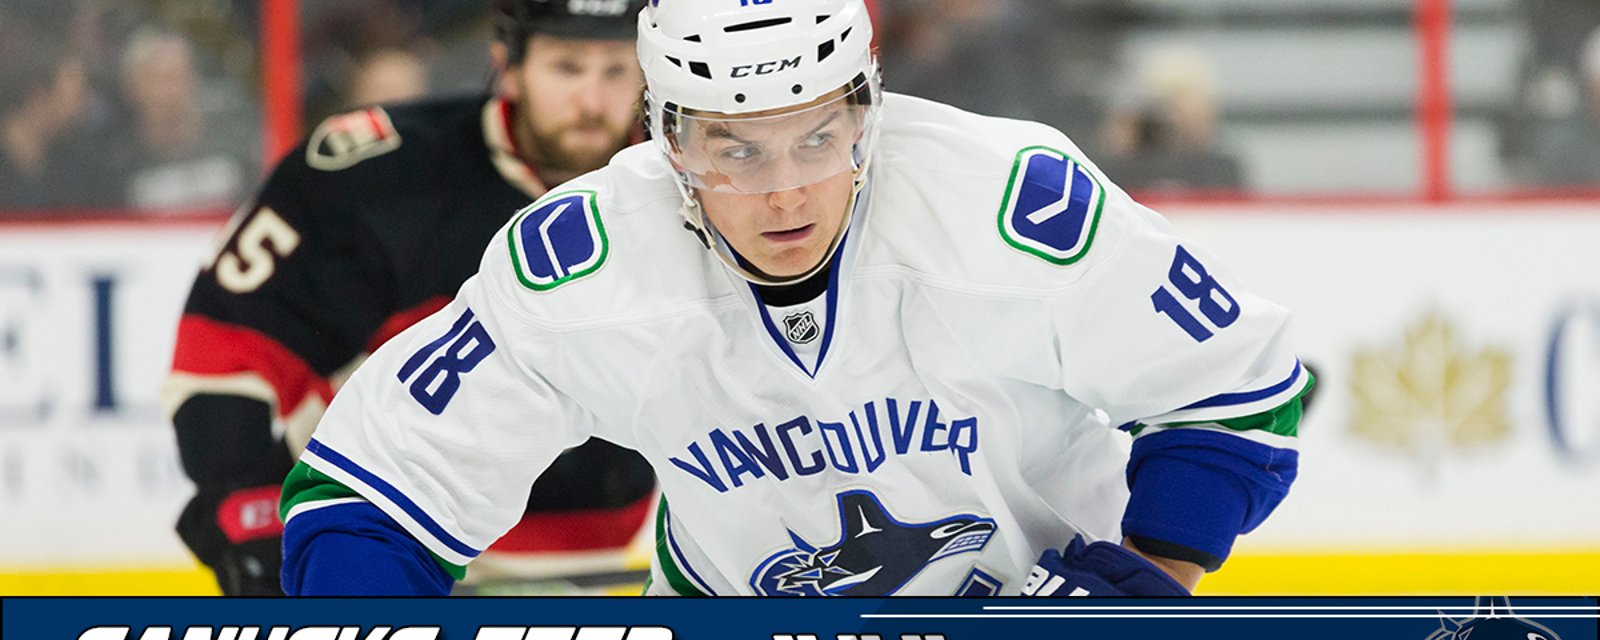 Report: Canucks Virtanen to play for Team Canada…but not how you think